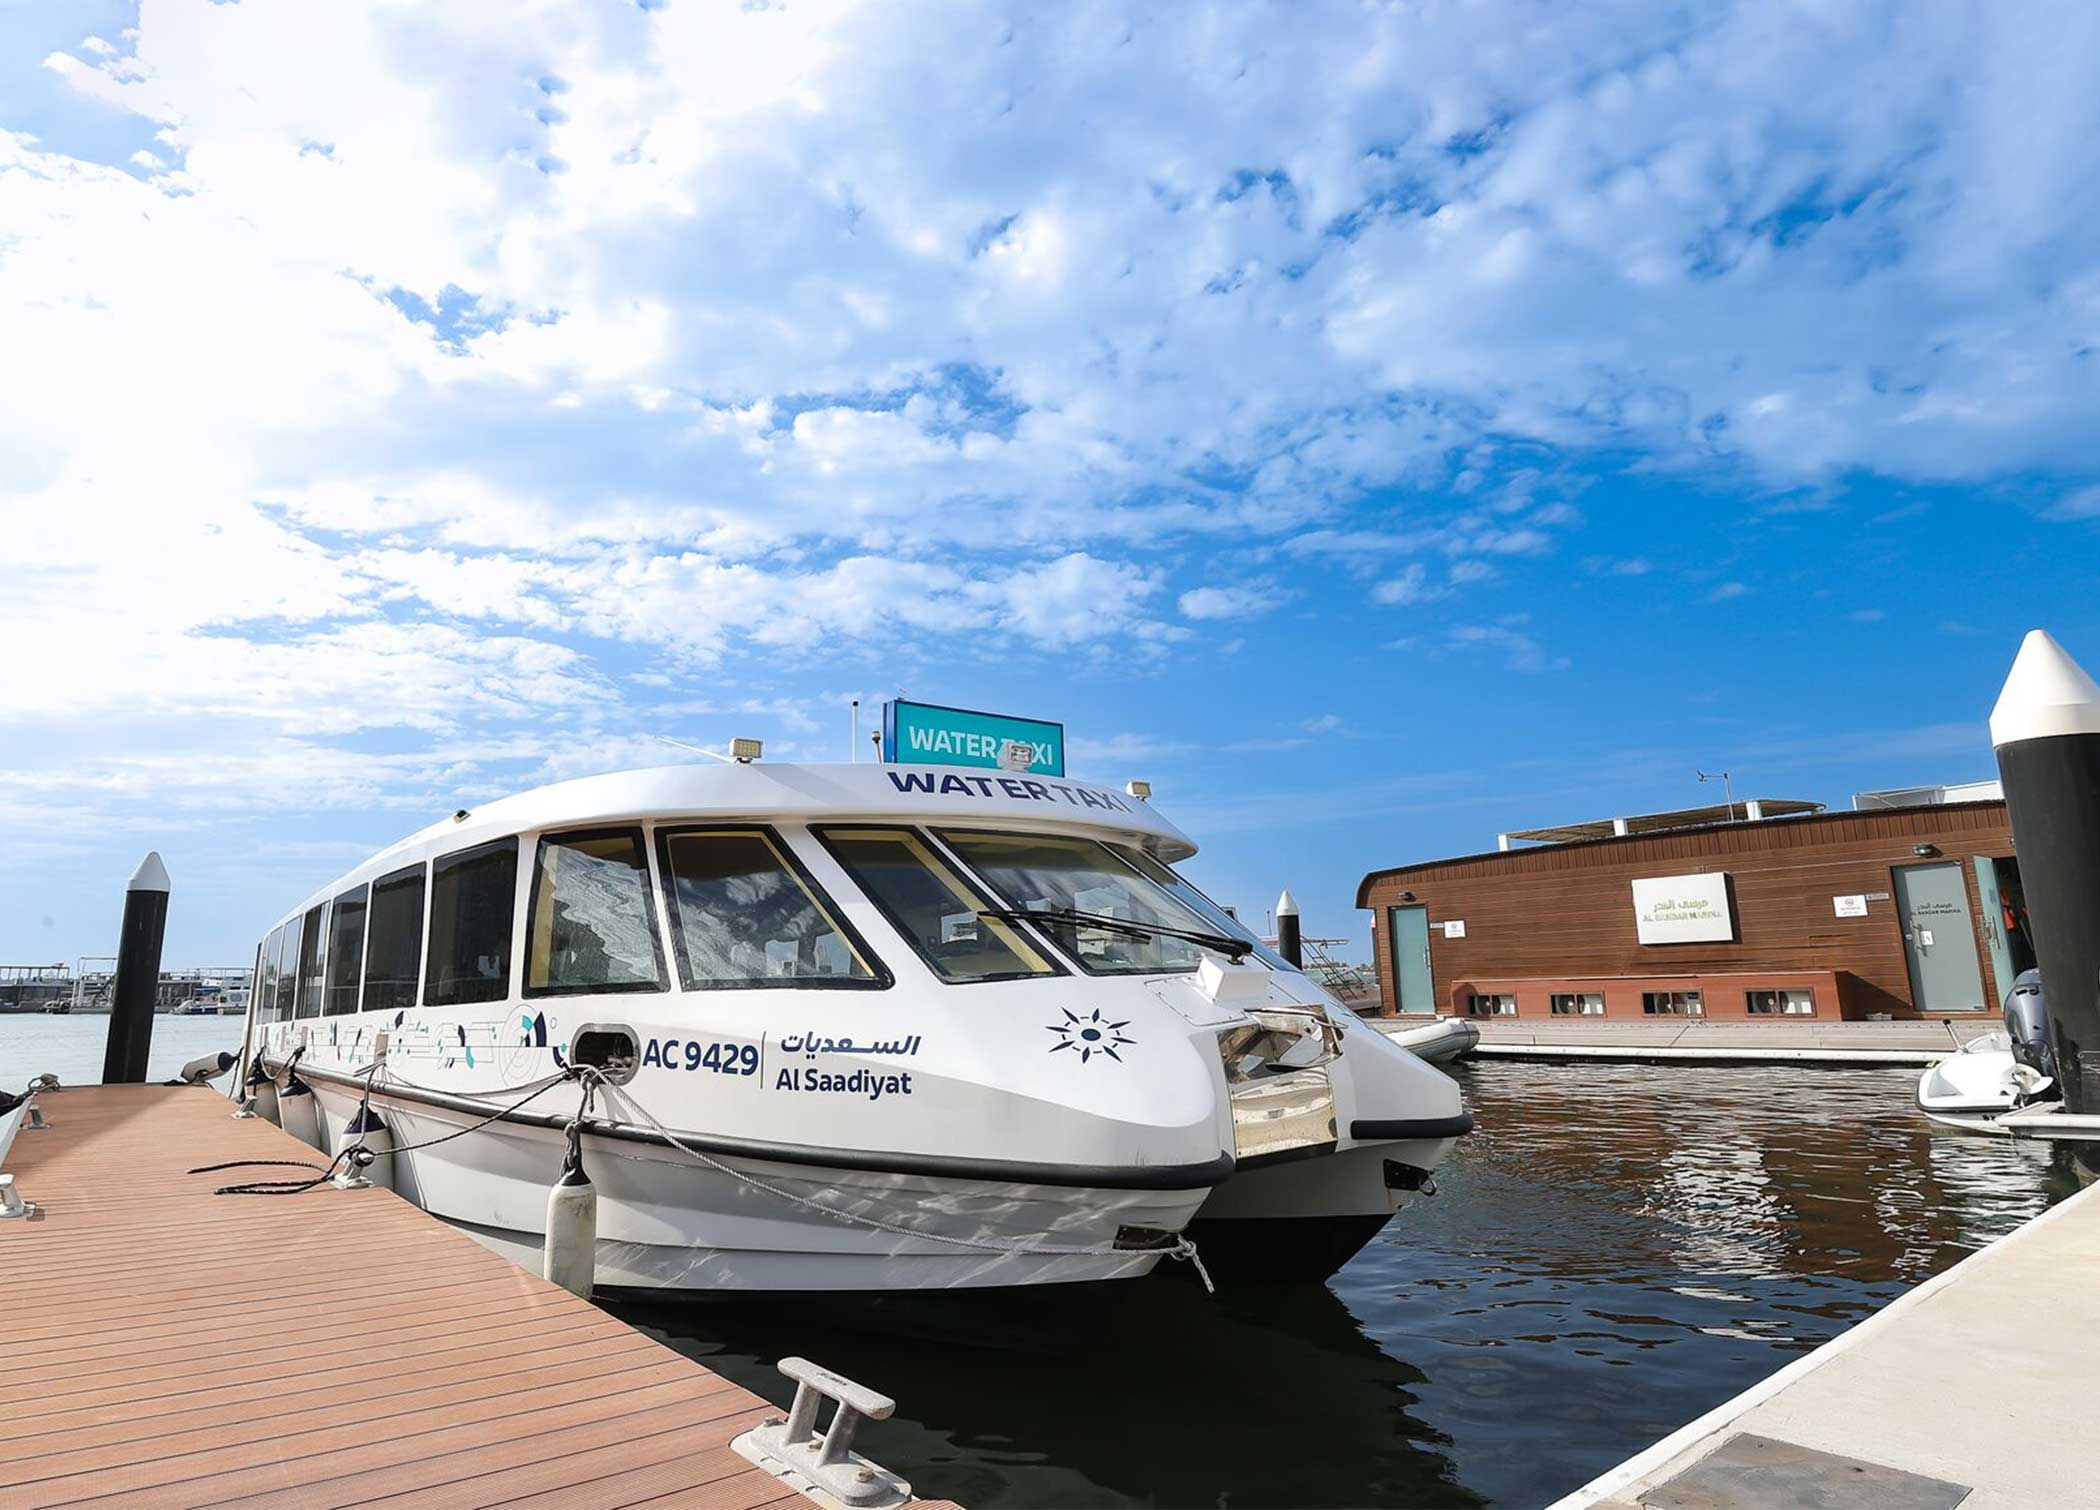 Abu Dhabi Maritime Launches Online Booking Platform for Public Water Transport